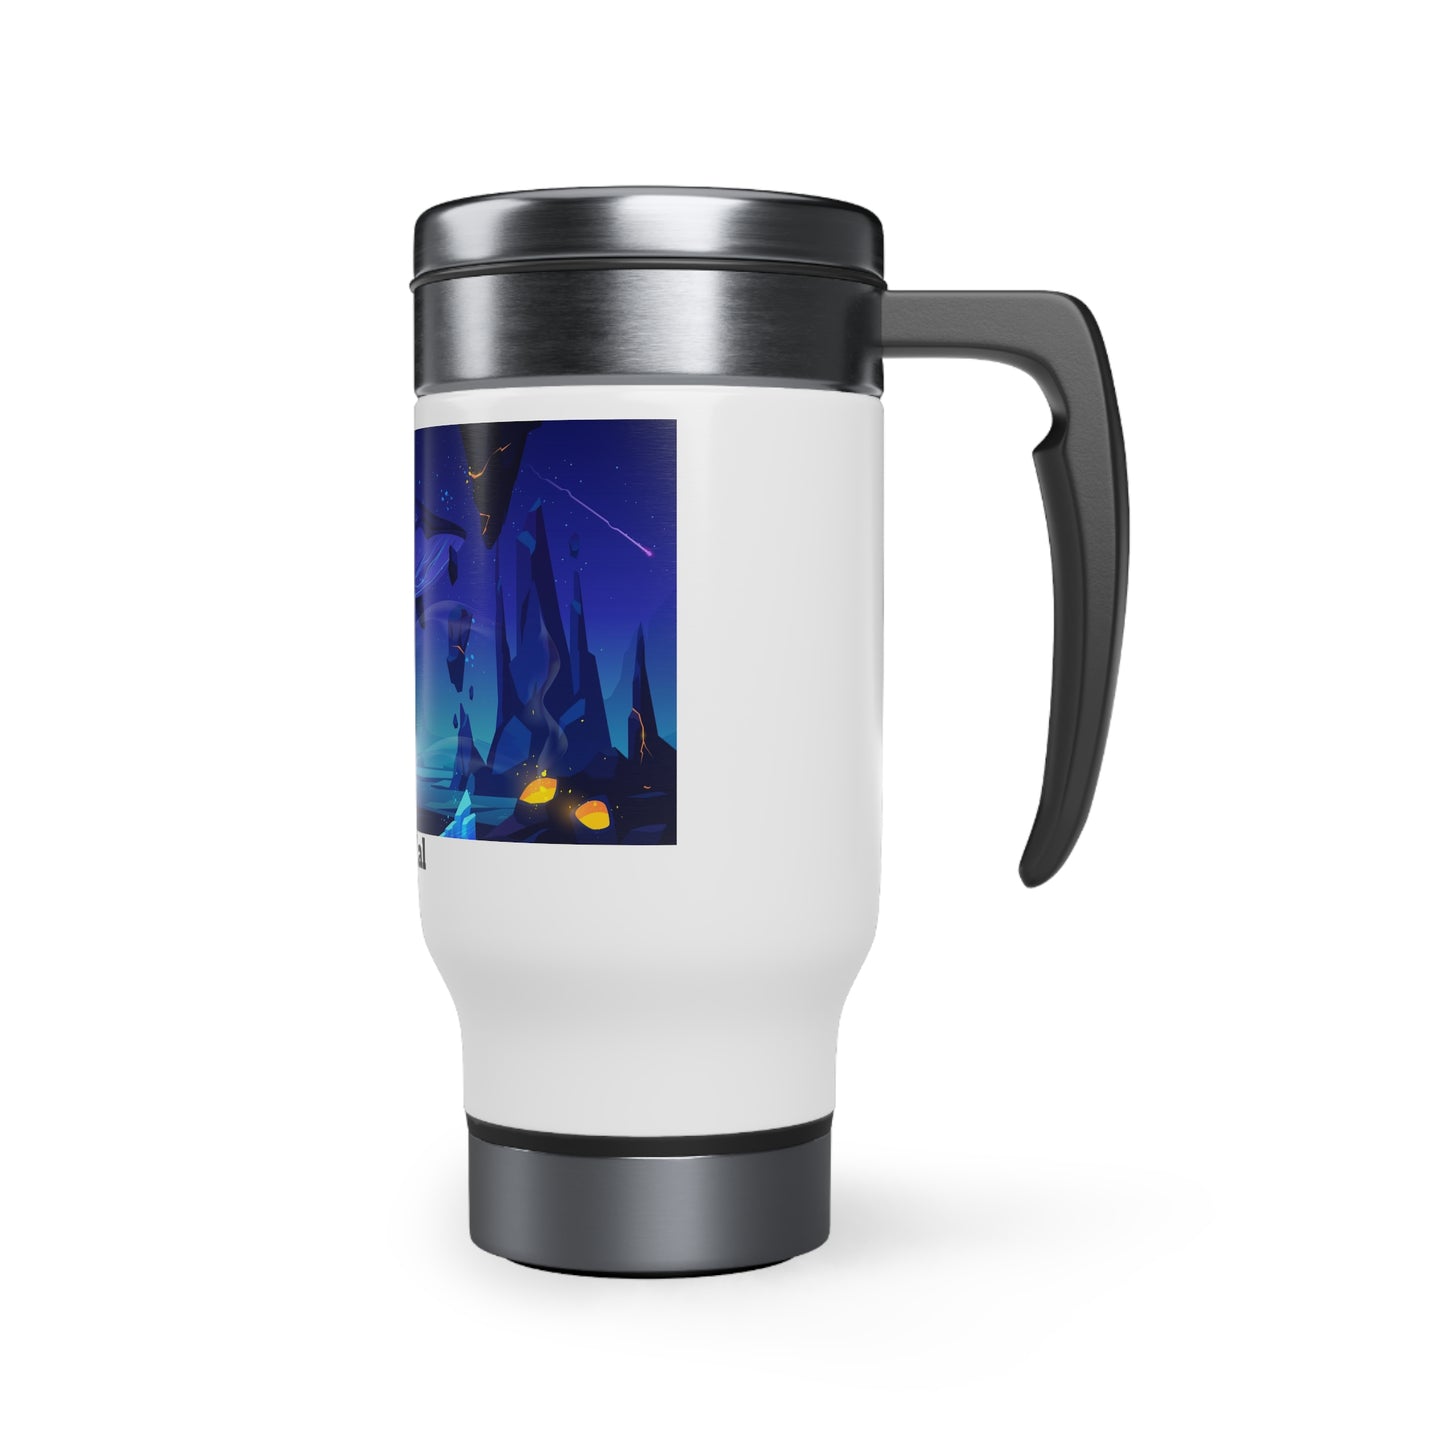 Whale - Stainless Steel Travel Mug with Handle, 14oz